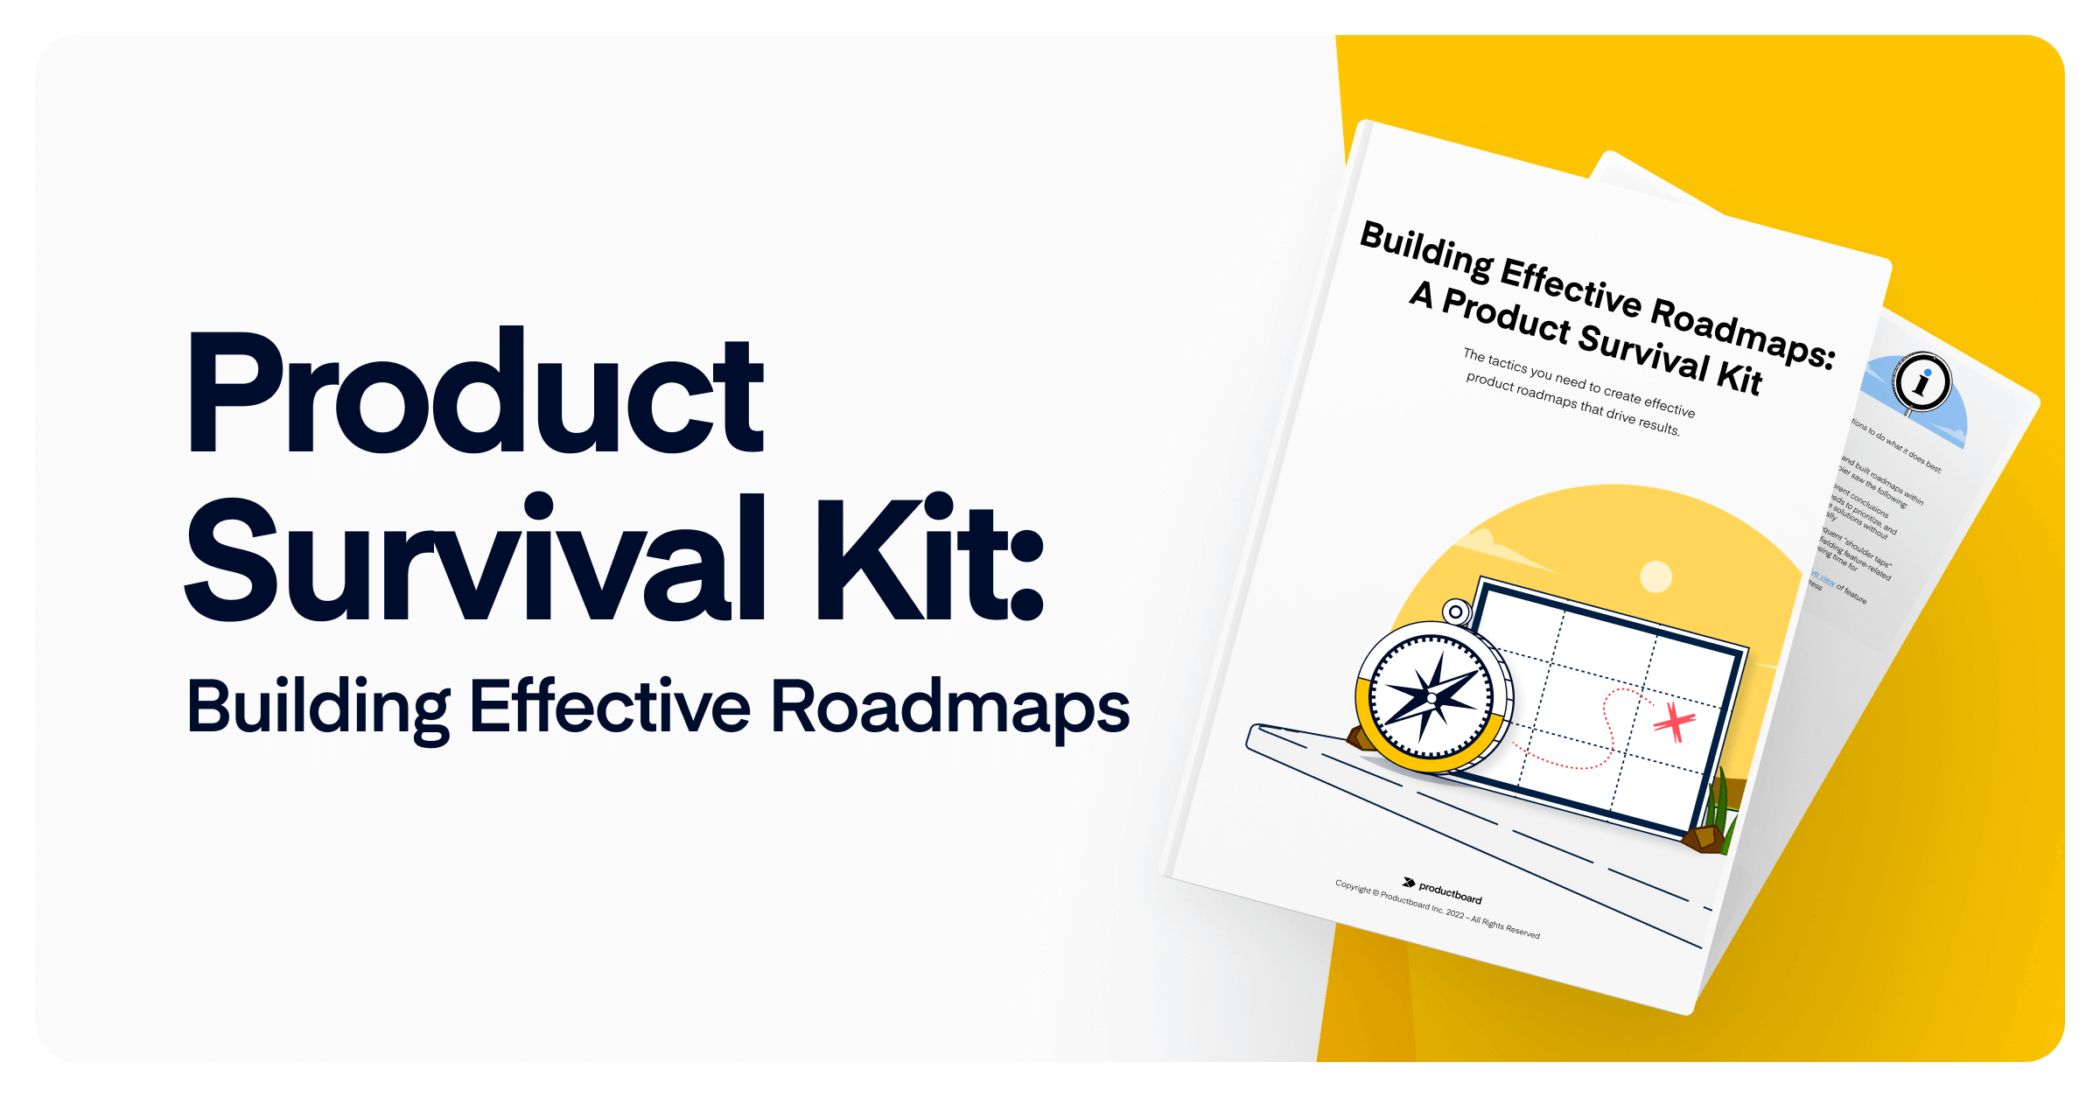 3 tactics to drive results with your product roadmaps